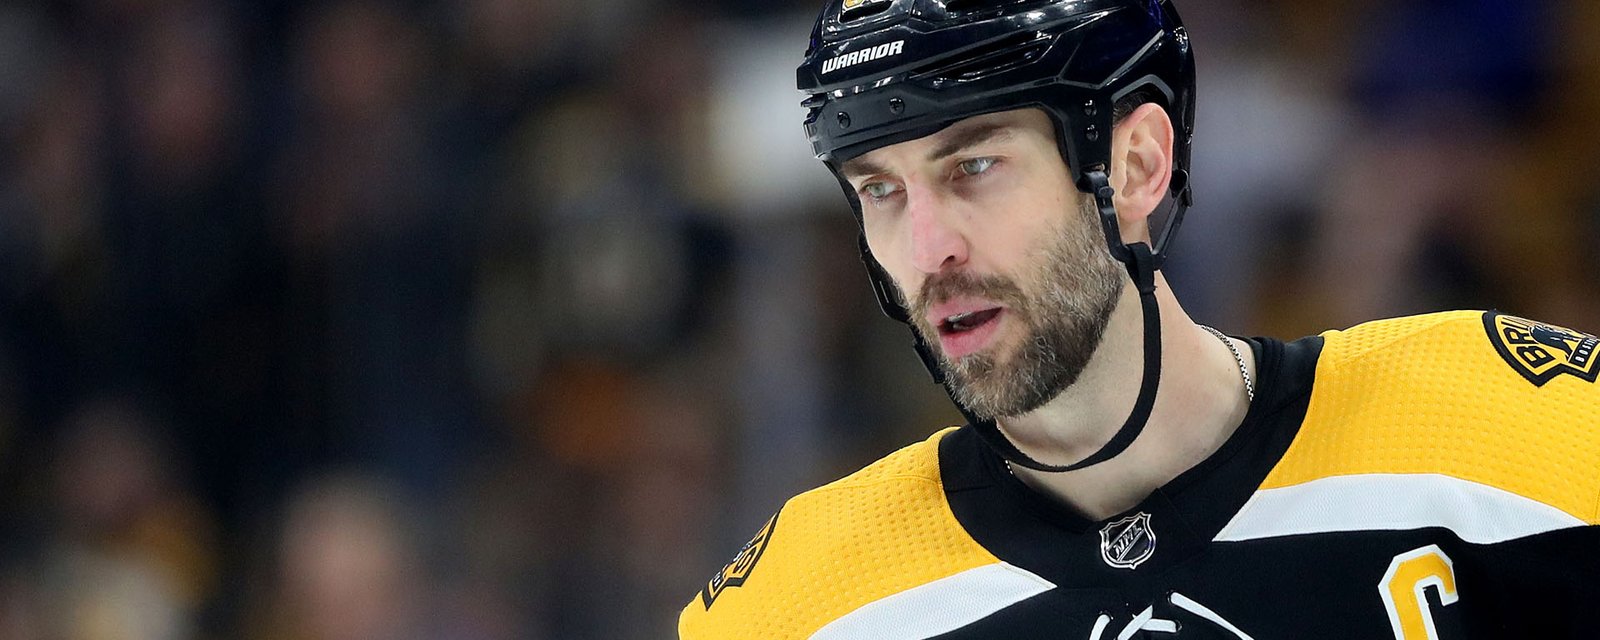 Rumour: Chara could sit out 2020-21 NHL season in protest!